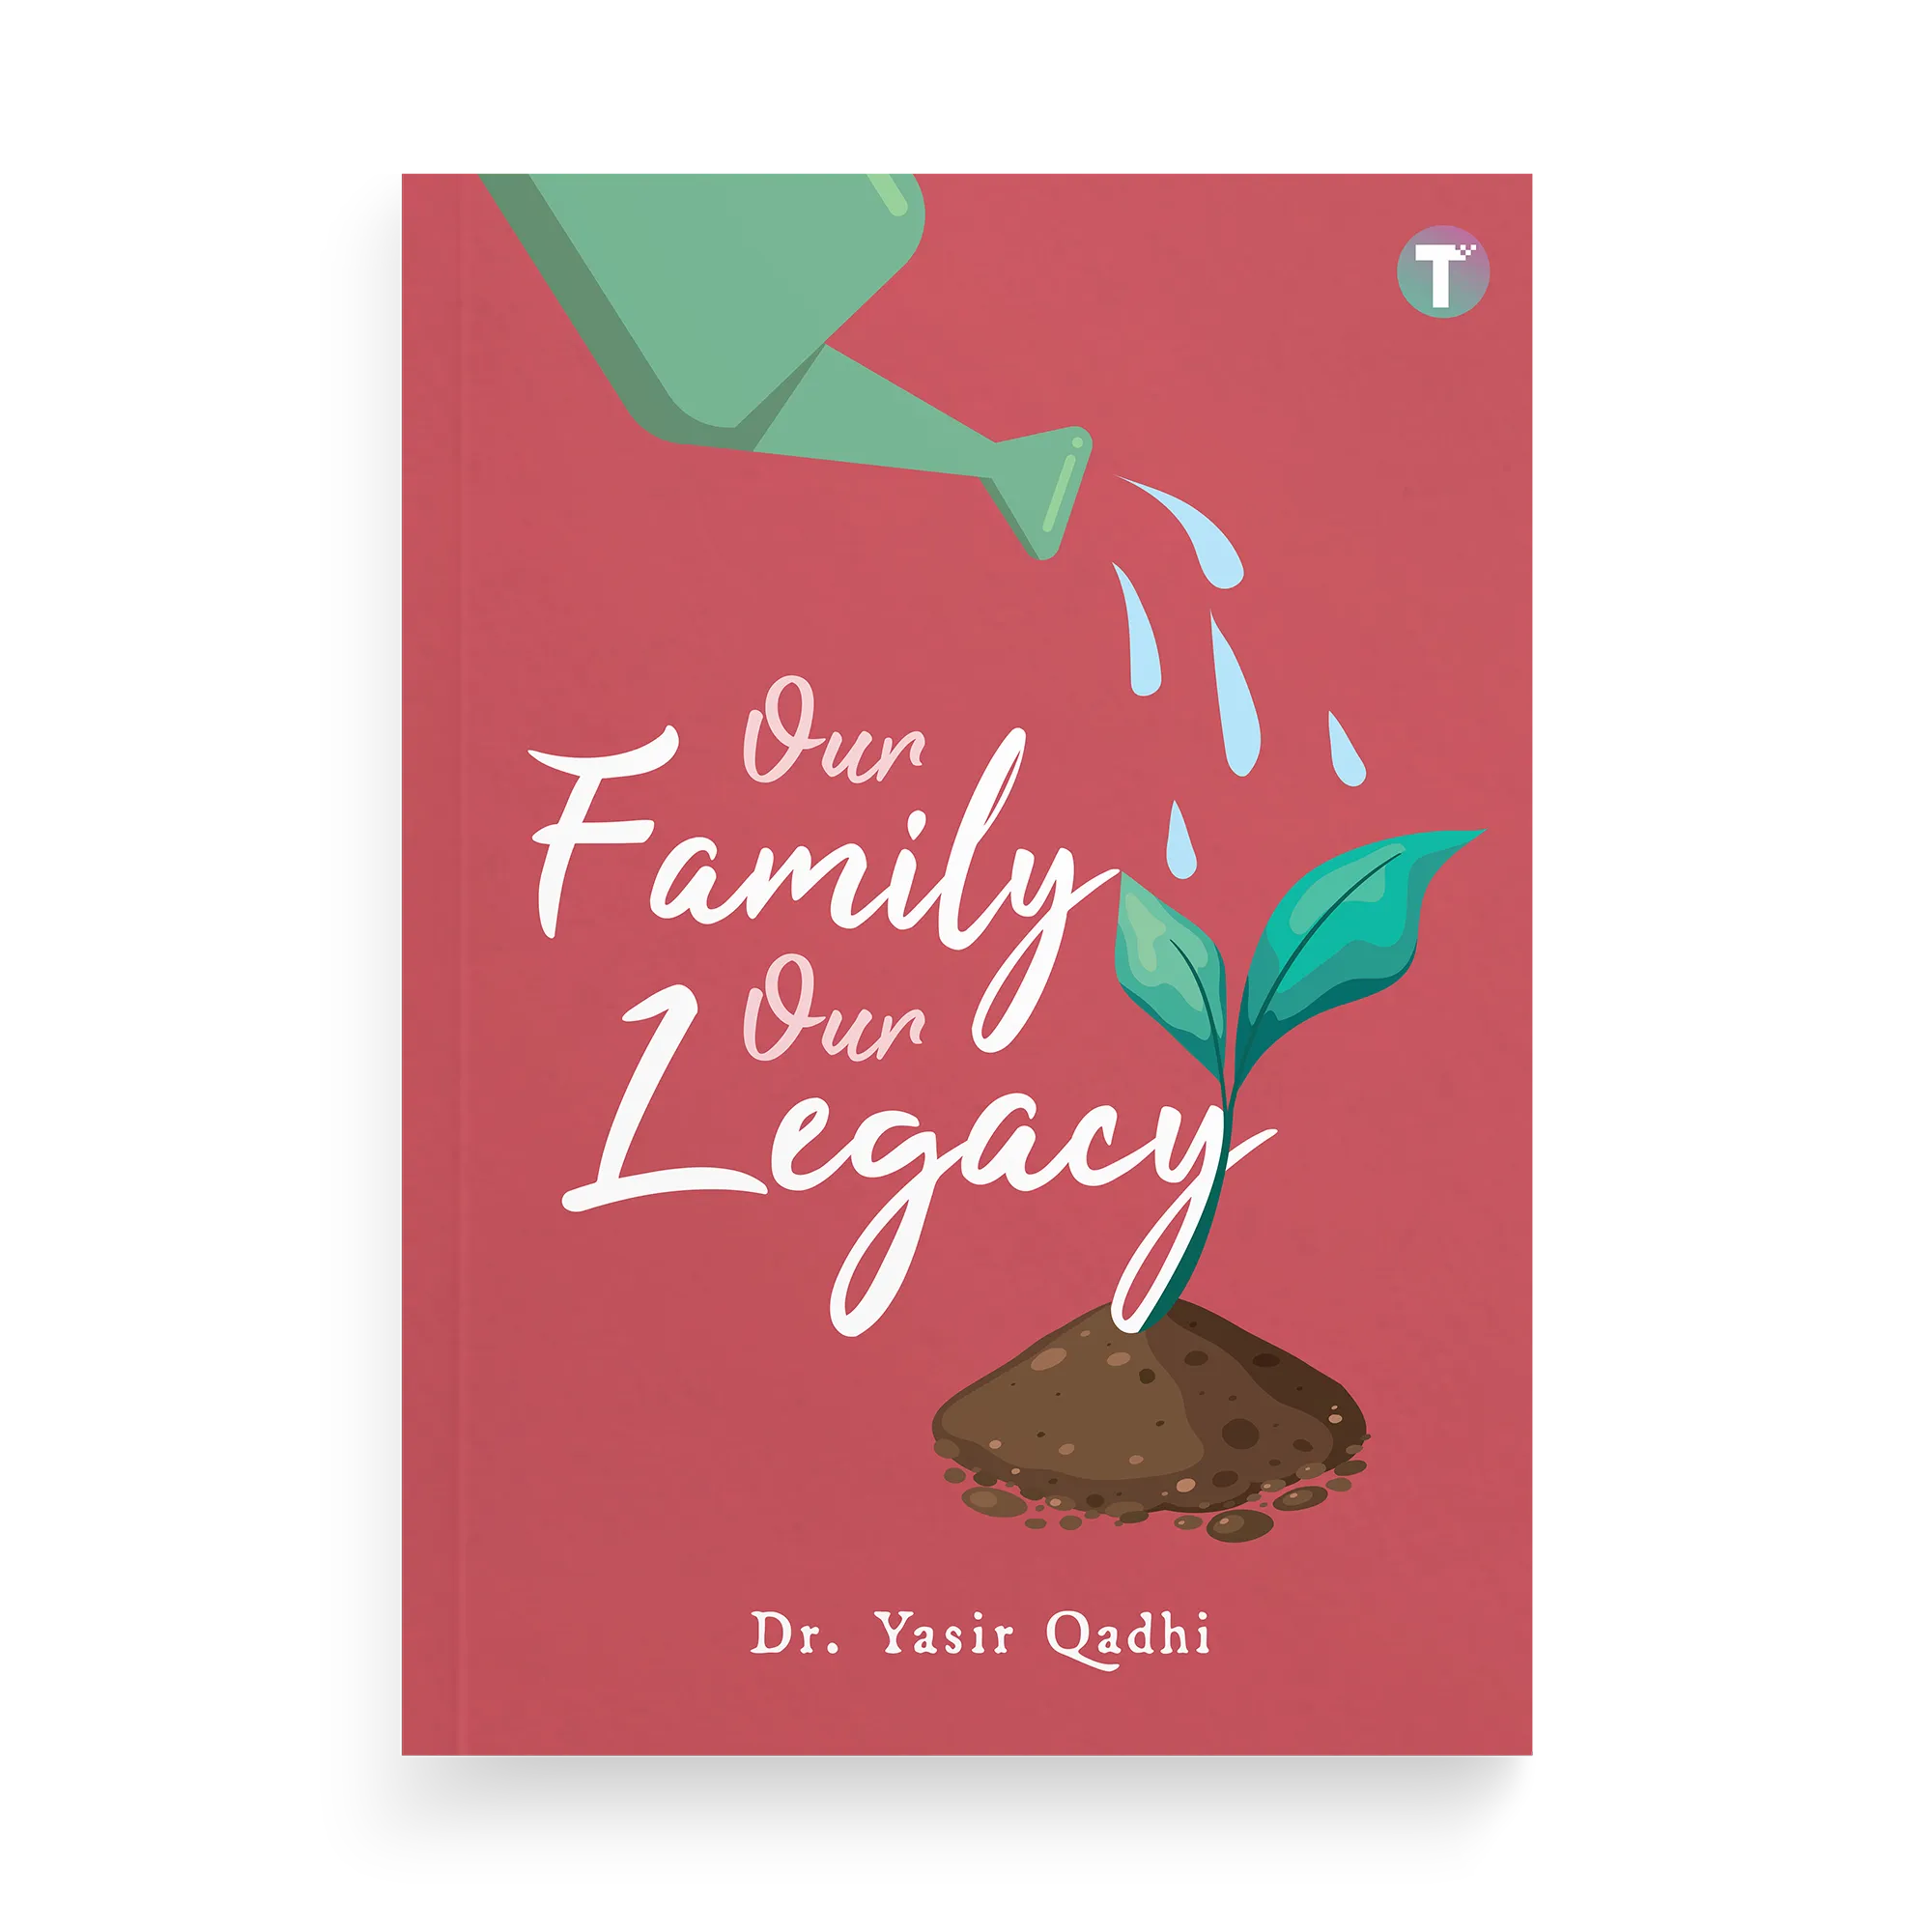 Our Family Our Legacy by Dr Yasir Qadhi